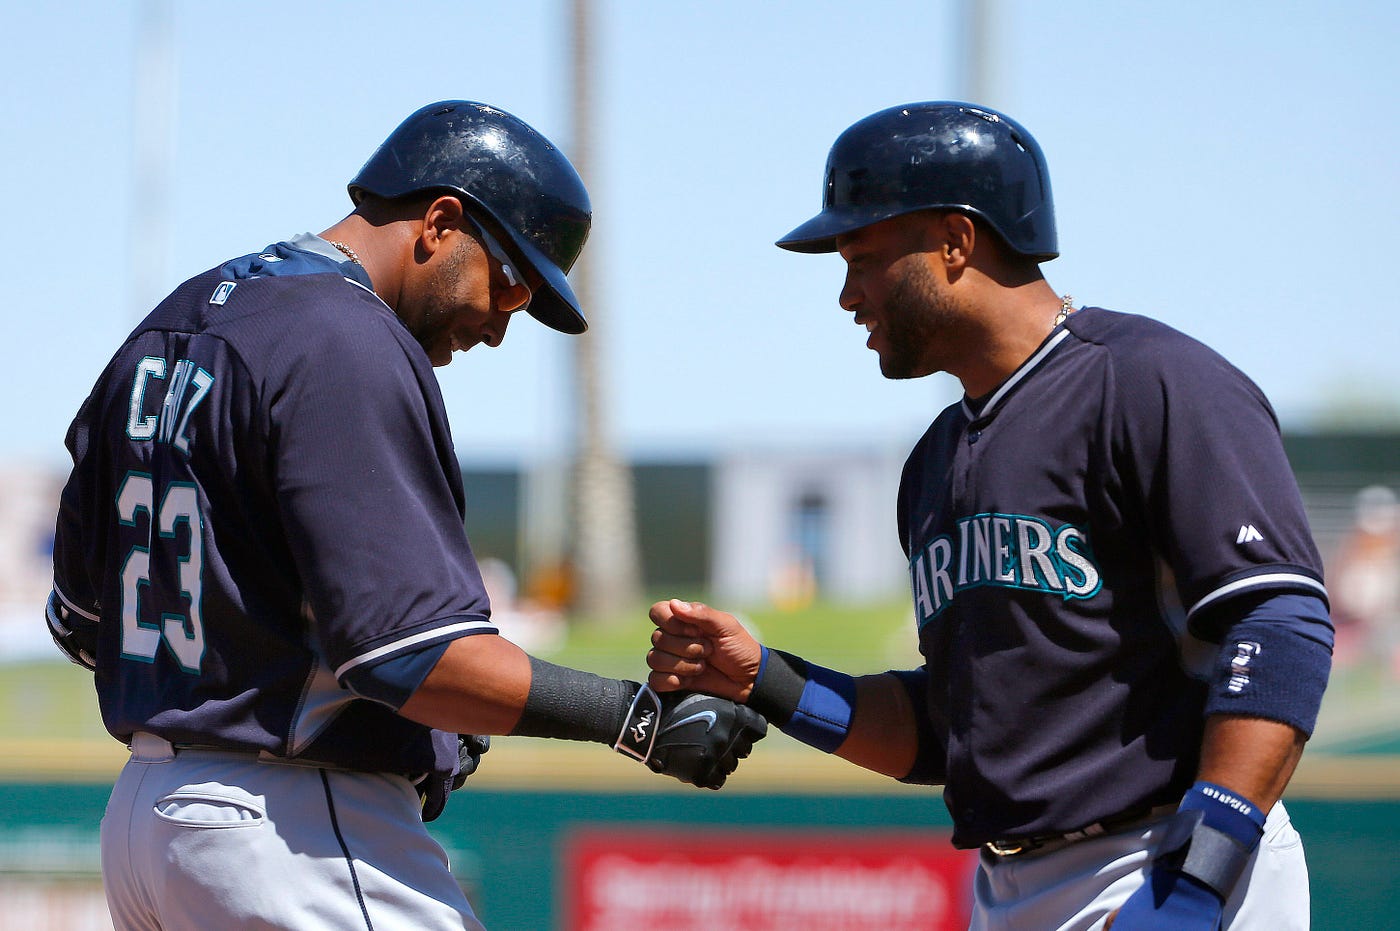 Dustin Ackley and the Mariners get off to a smiling start